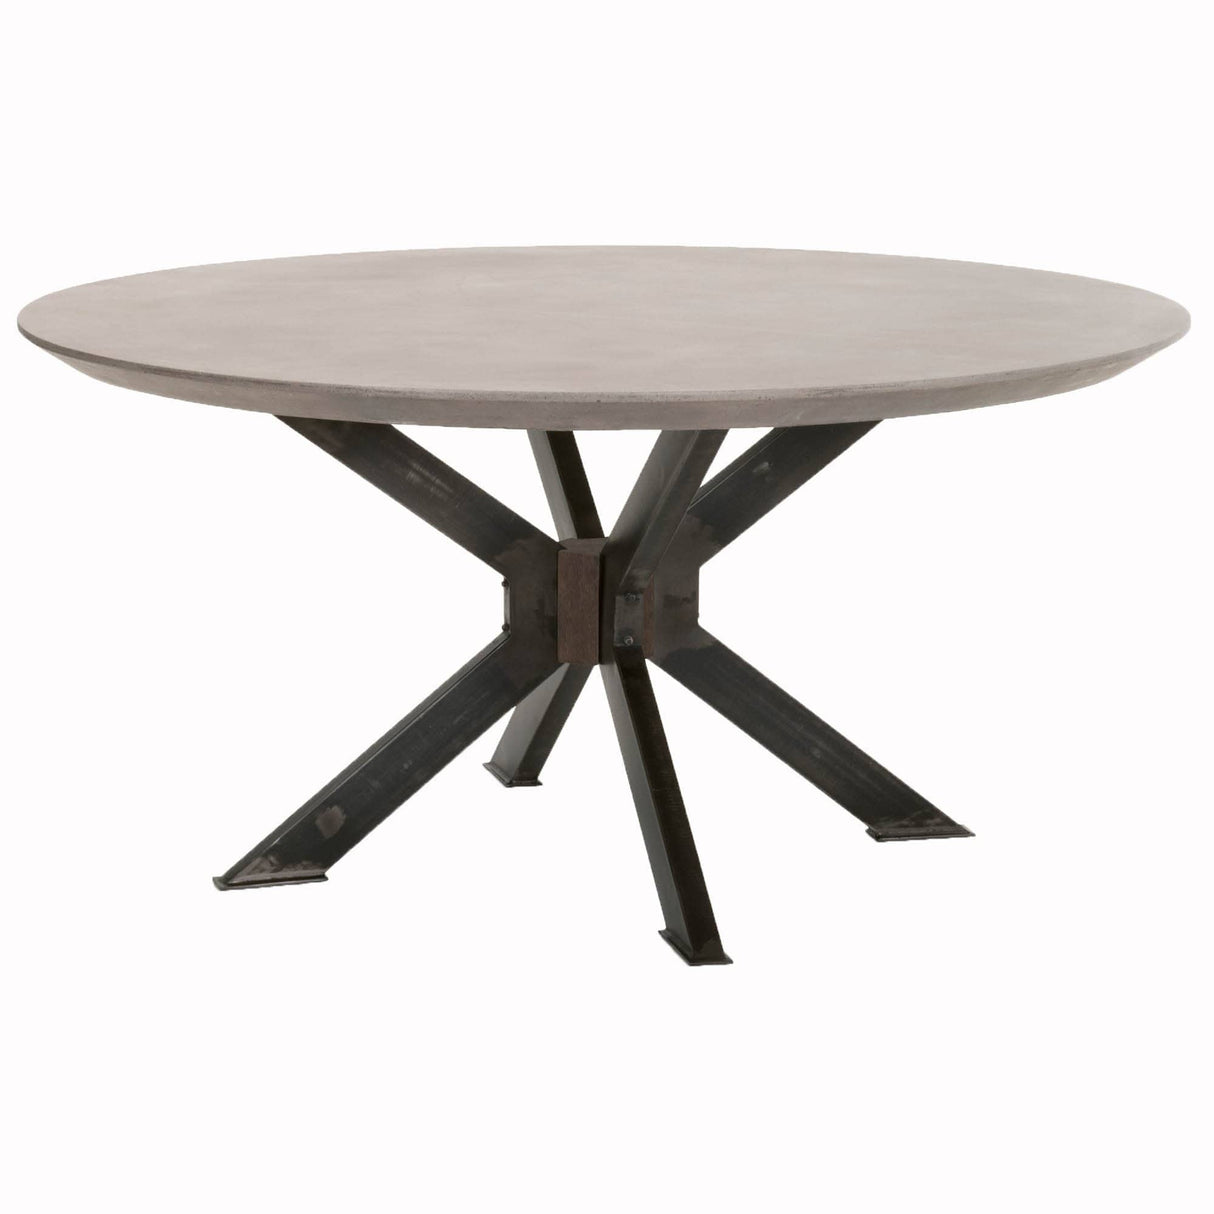 BLU Industry Round Dining Table Furniture orient-express-4632-RD.BLK/AGRY